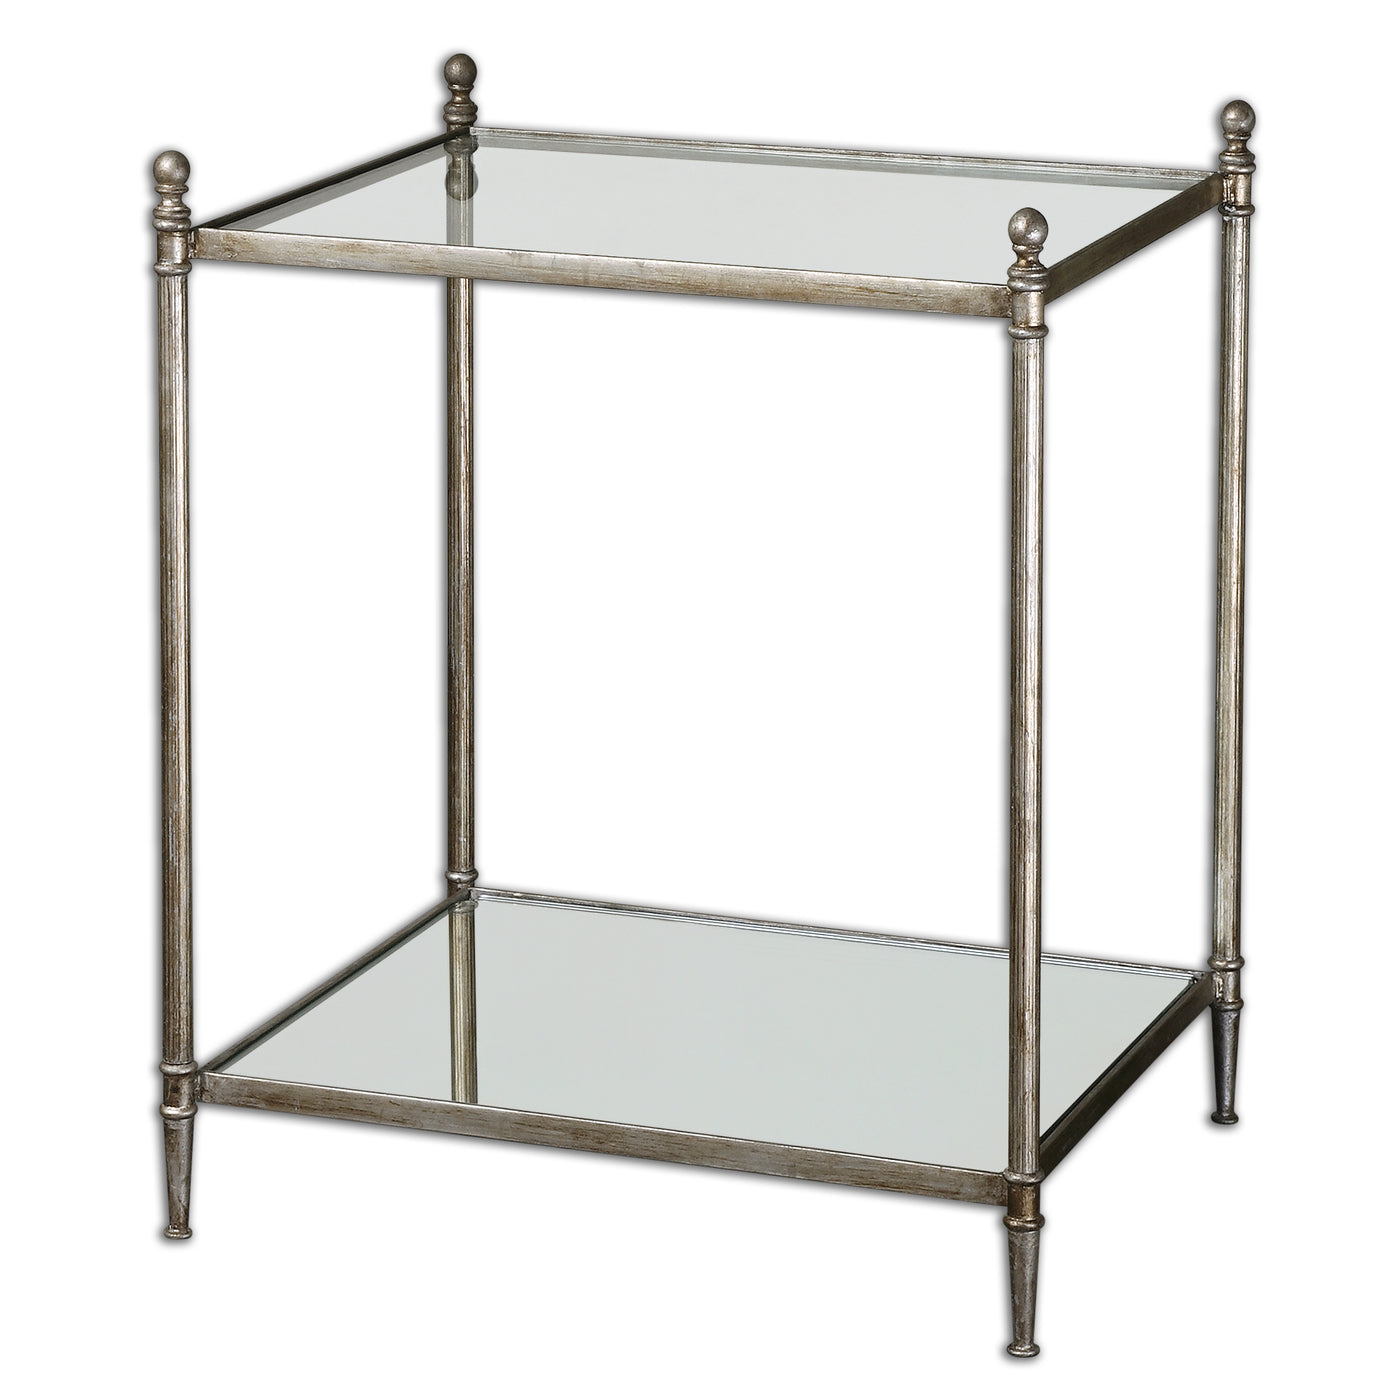 Forged Iron Frame In Antiqued Silver Leaf With Clear, Tempered Glass Top And Mirrored Gallery Shelf.